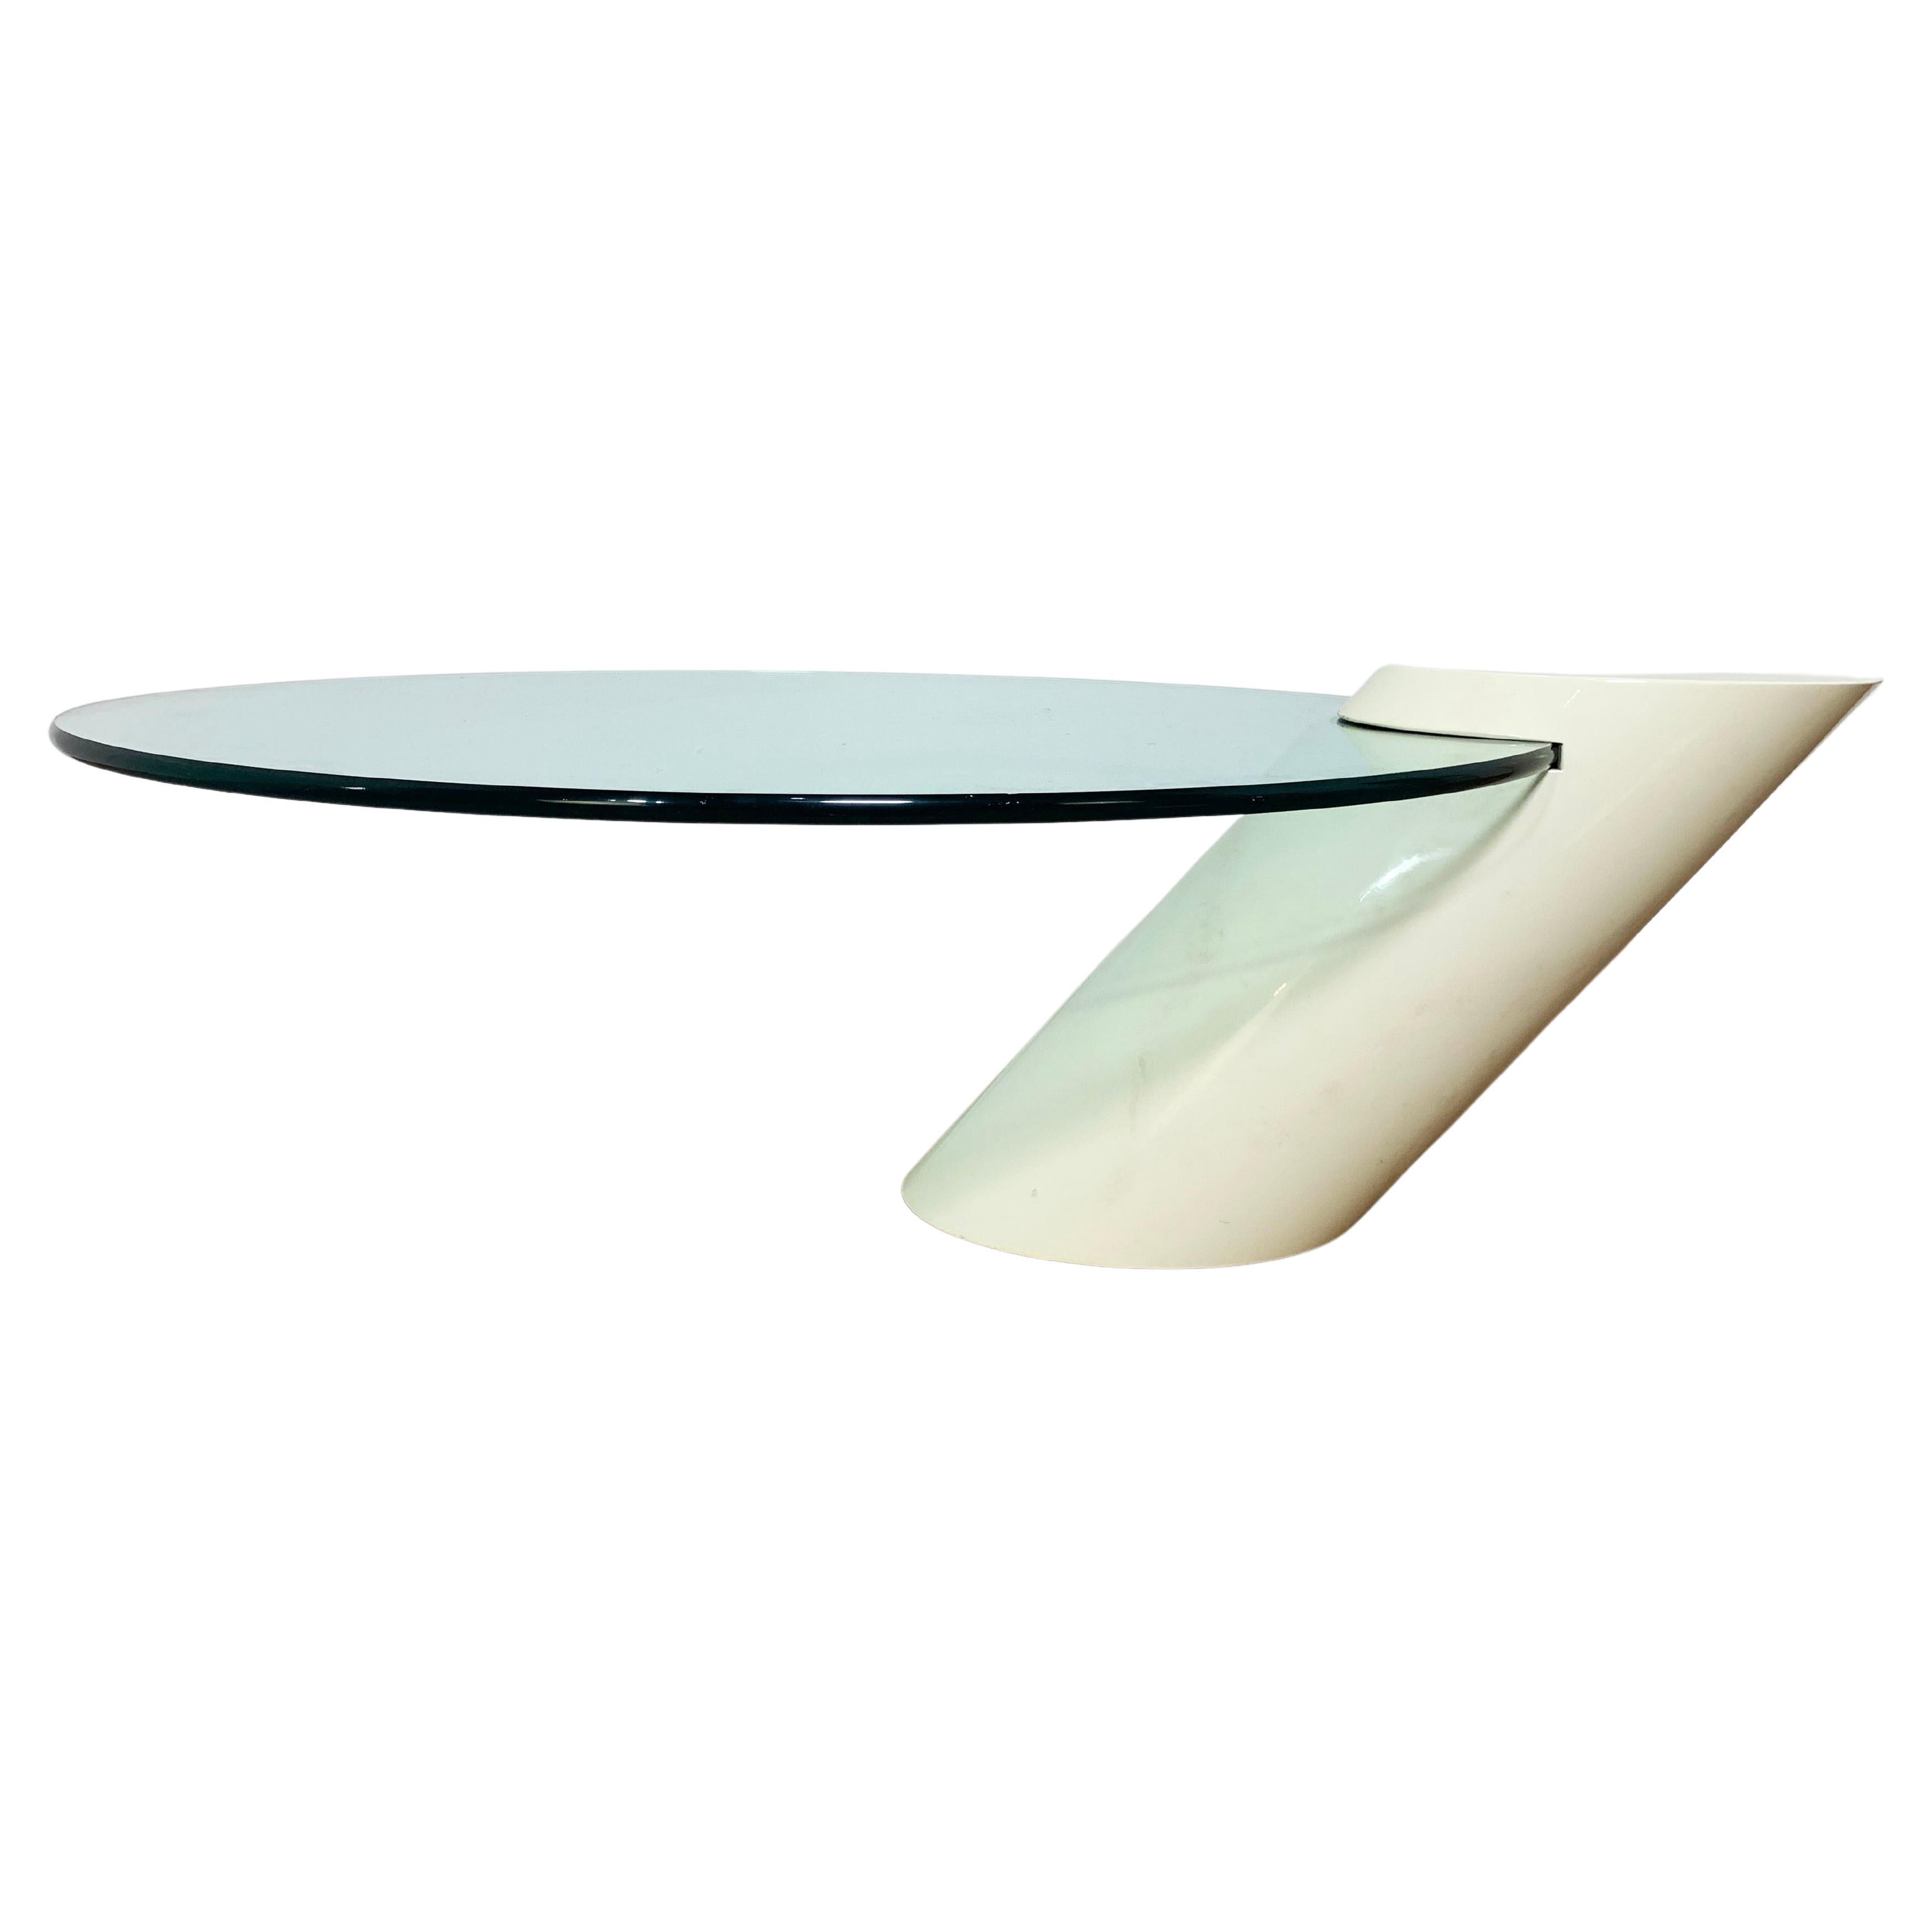 Wade Beam for Brueton Cantilevered " Zephyr" Cocktail Table